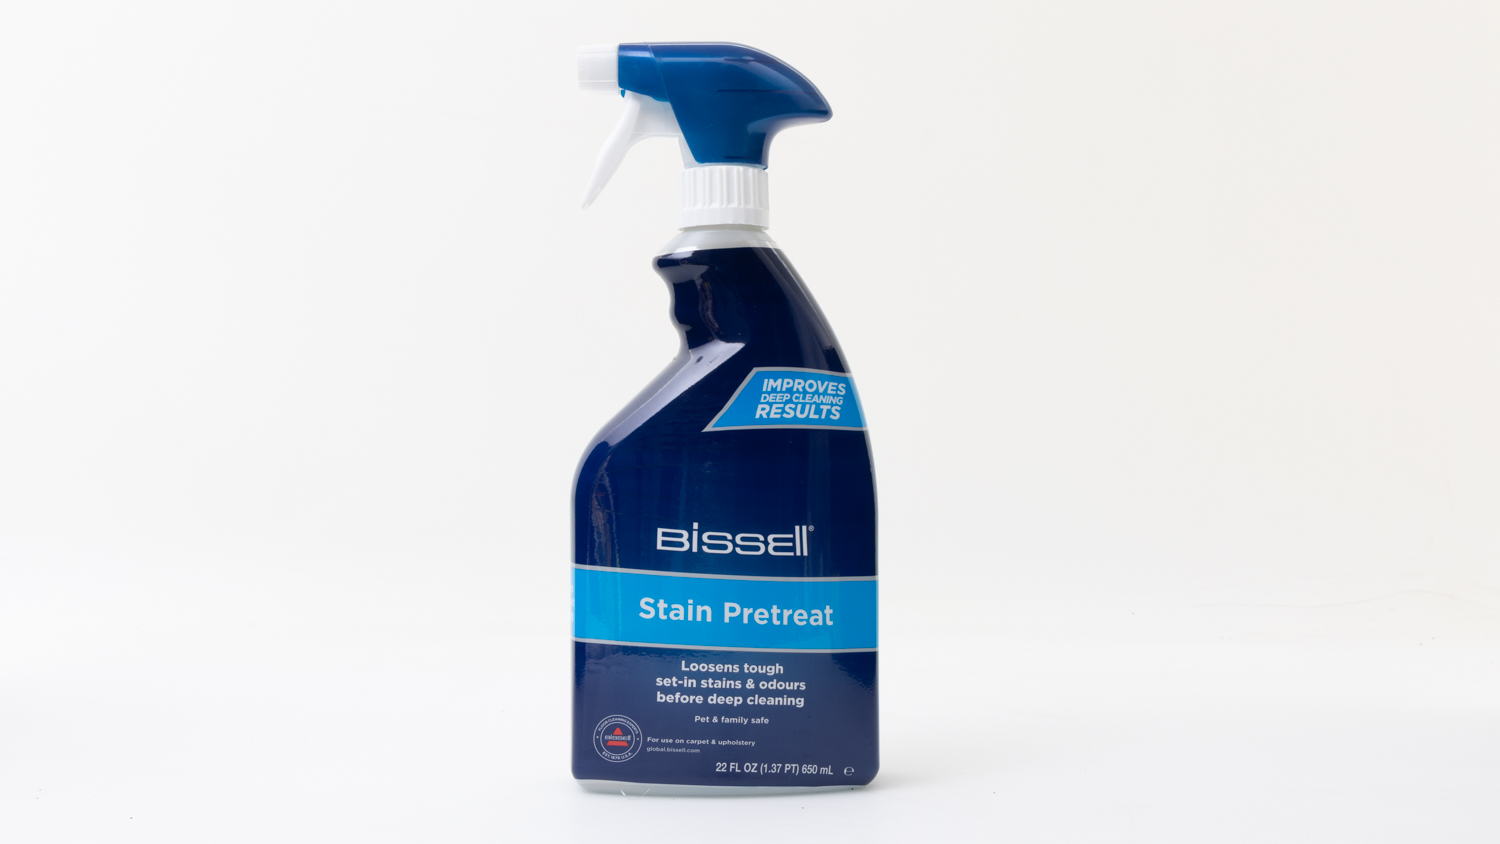 Bissell Stain Pretreat carousel image